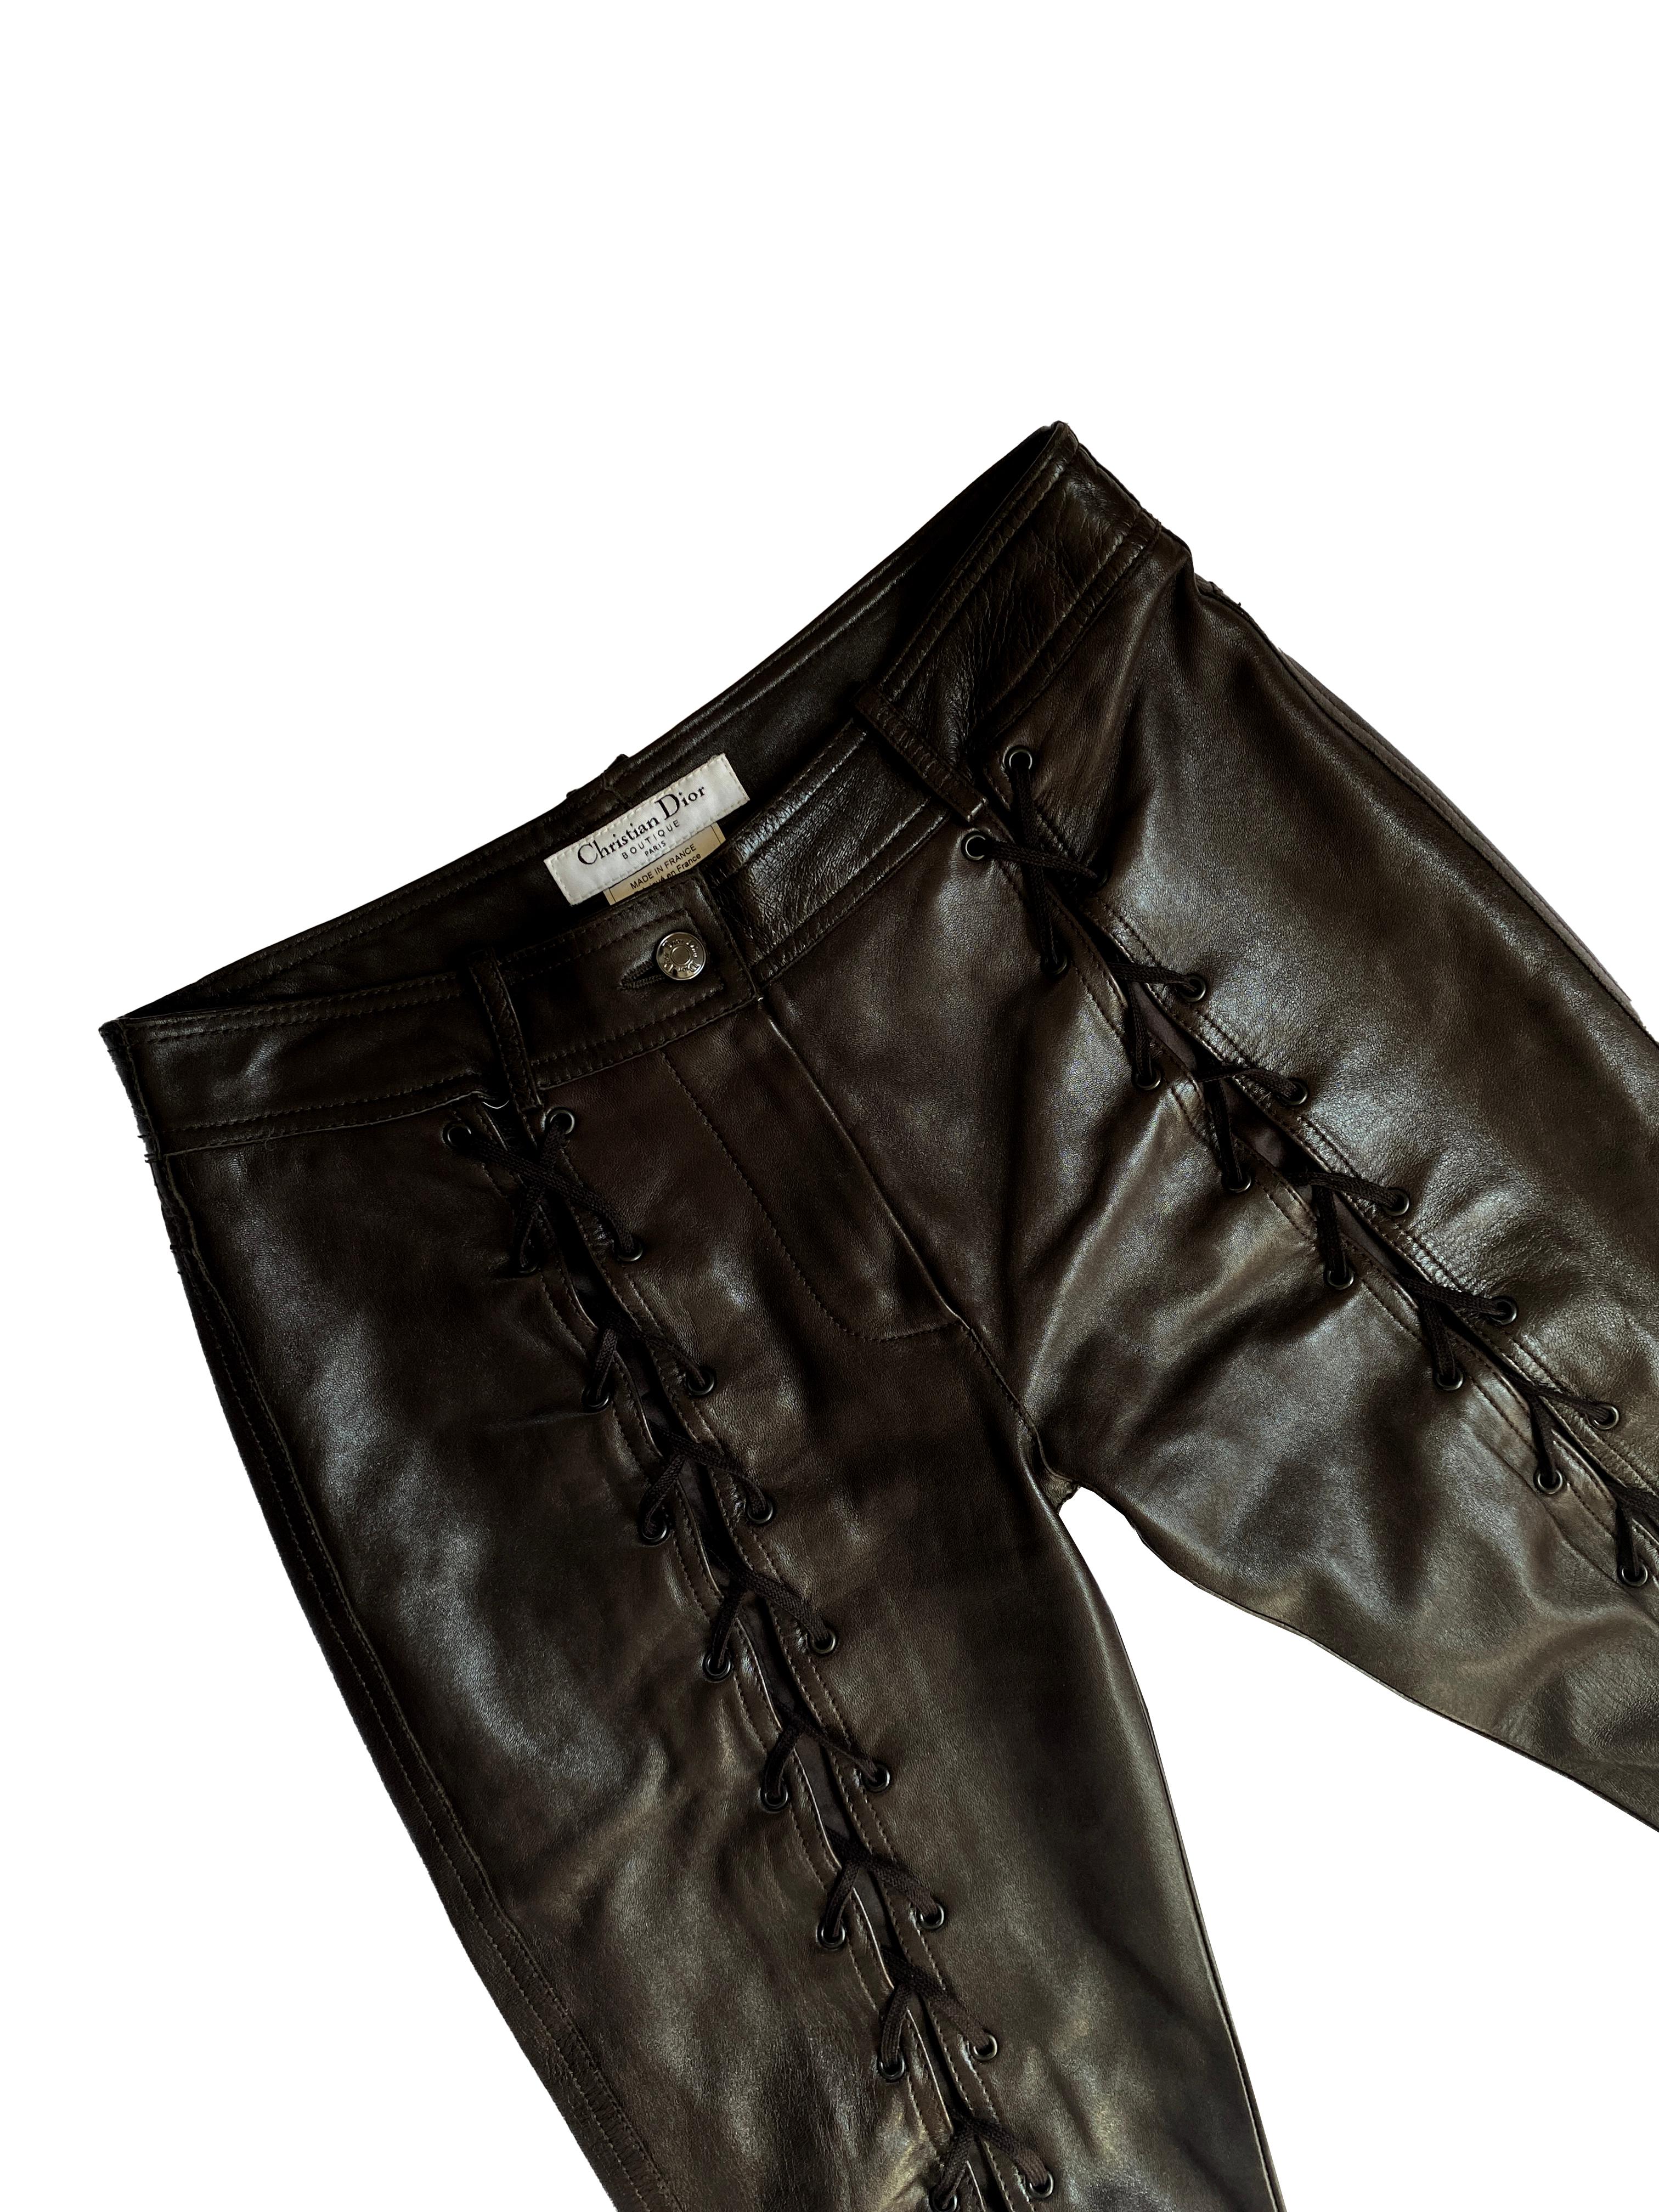 Christian Dior by John Galliano Fall 2003 famous lace up leather pants in black. Wear the laces as tight or loose as you wish which will affect how much skin you show! Wrap around the leg straps with buckles.
Silver hardware

FR 38 - US 6
100%